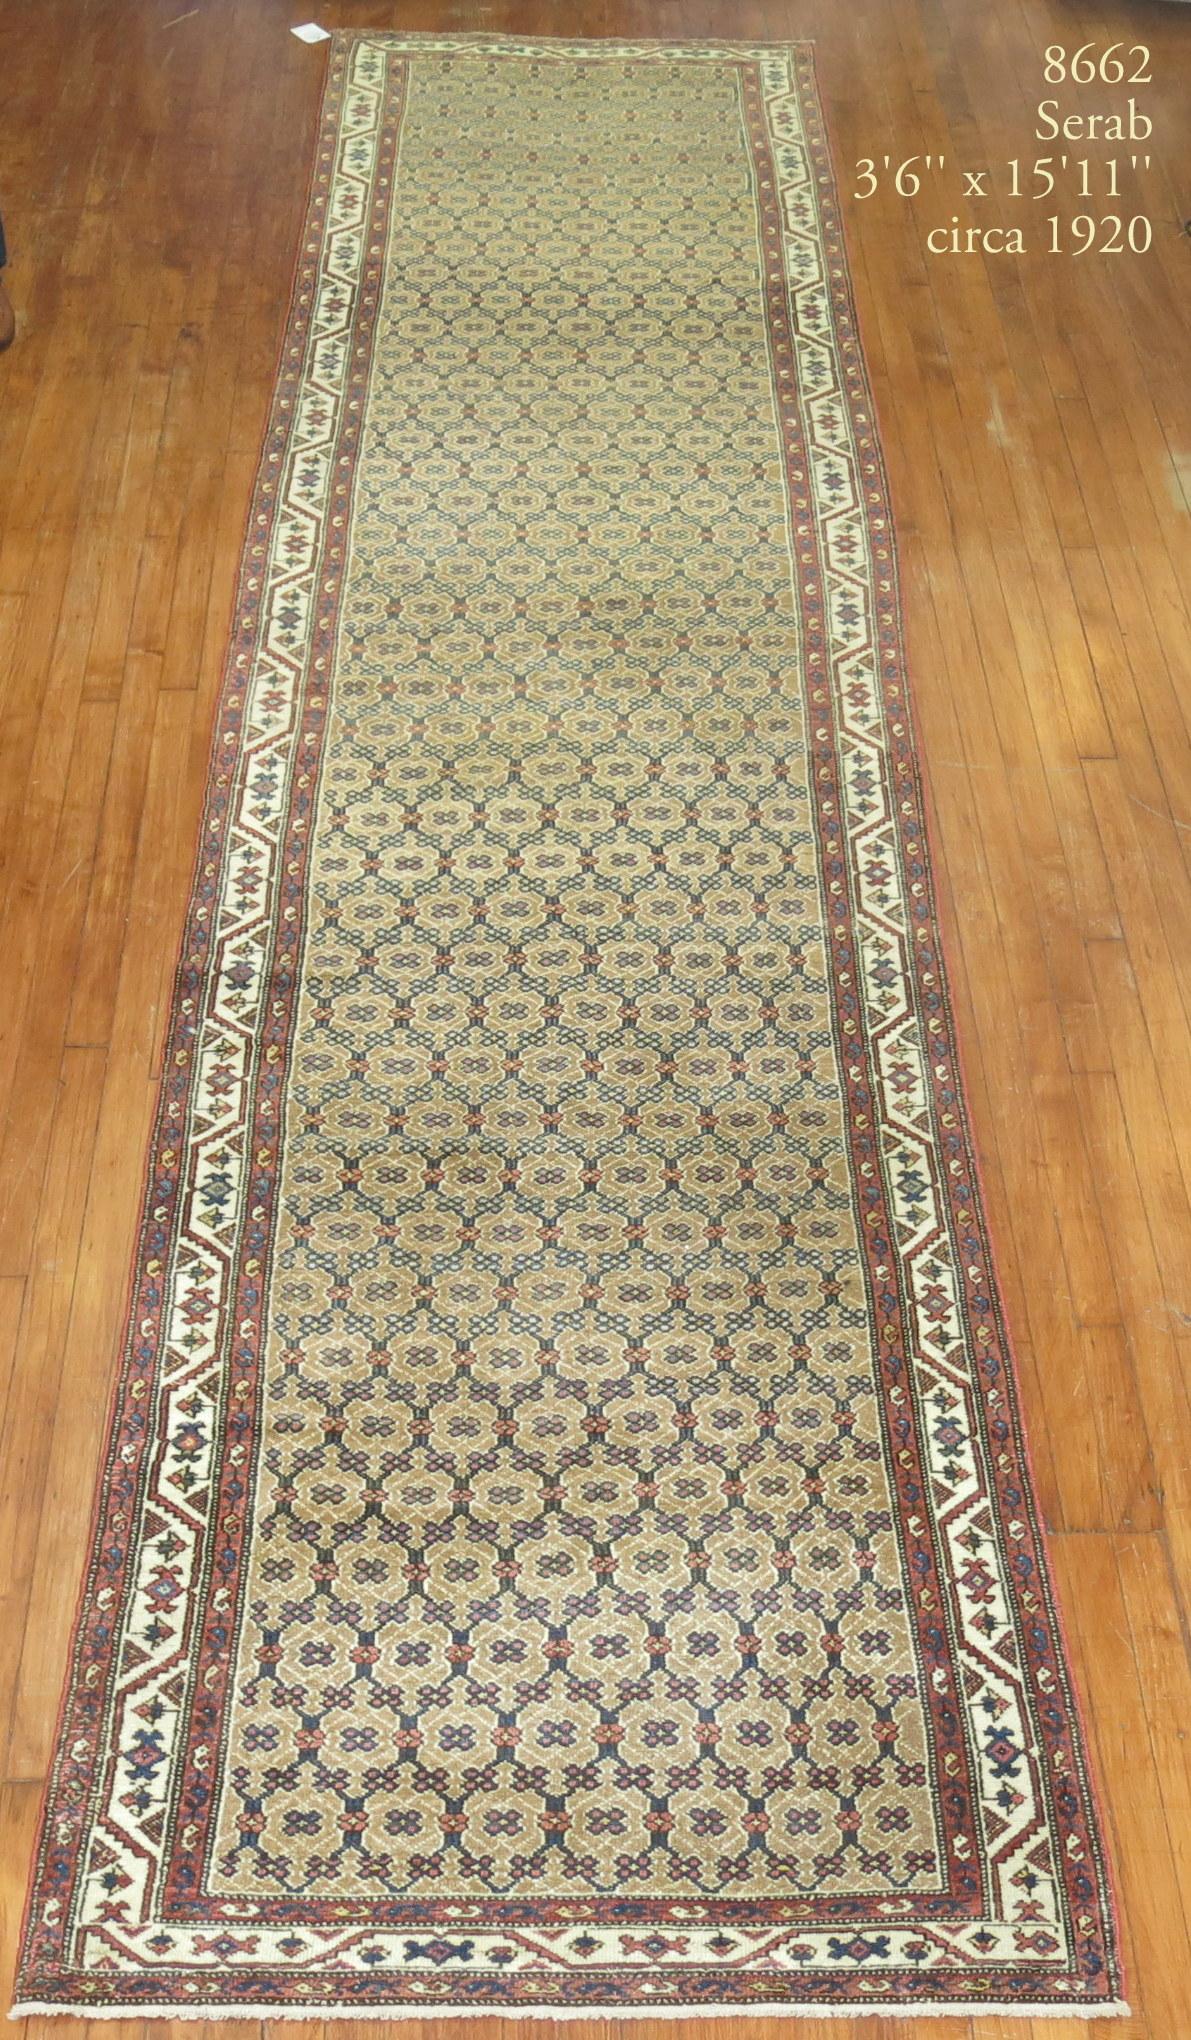 An authentic early 20th century Persian Serab runner with a small all-over geometric design predominantly in camel and blue.

Measures: 3'6'' x 15'11''.